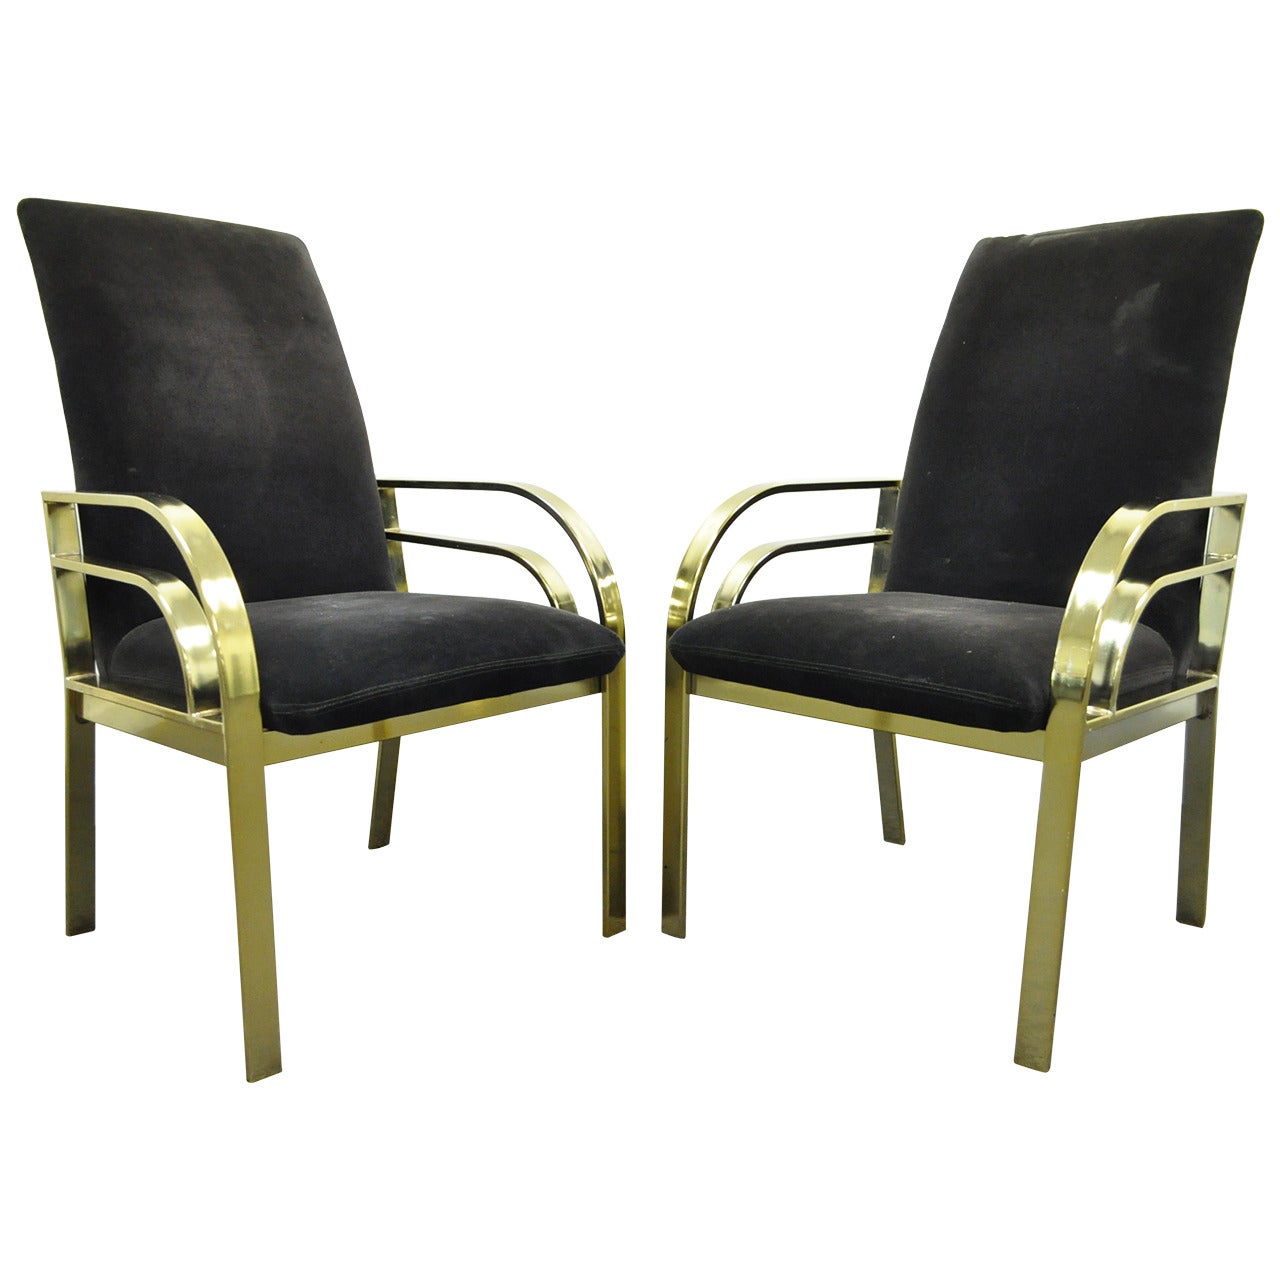 Pair of Brass-Plated Hollywood Regency Sculpted Armchairs after Pierre Cardin